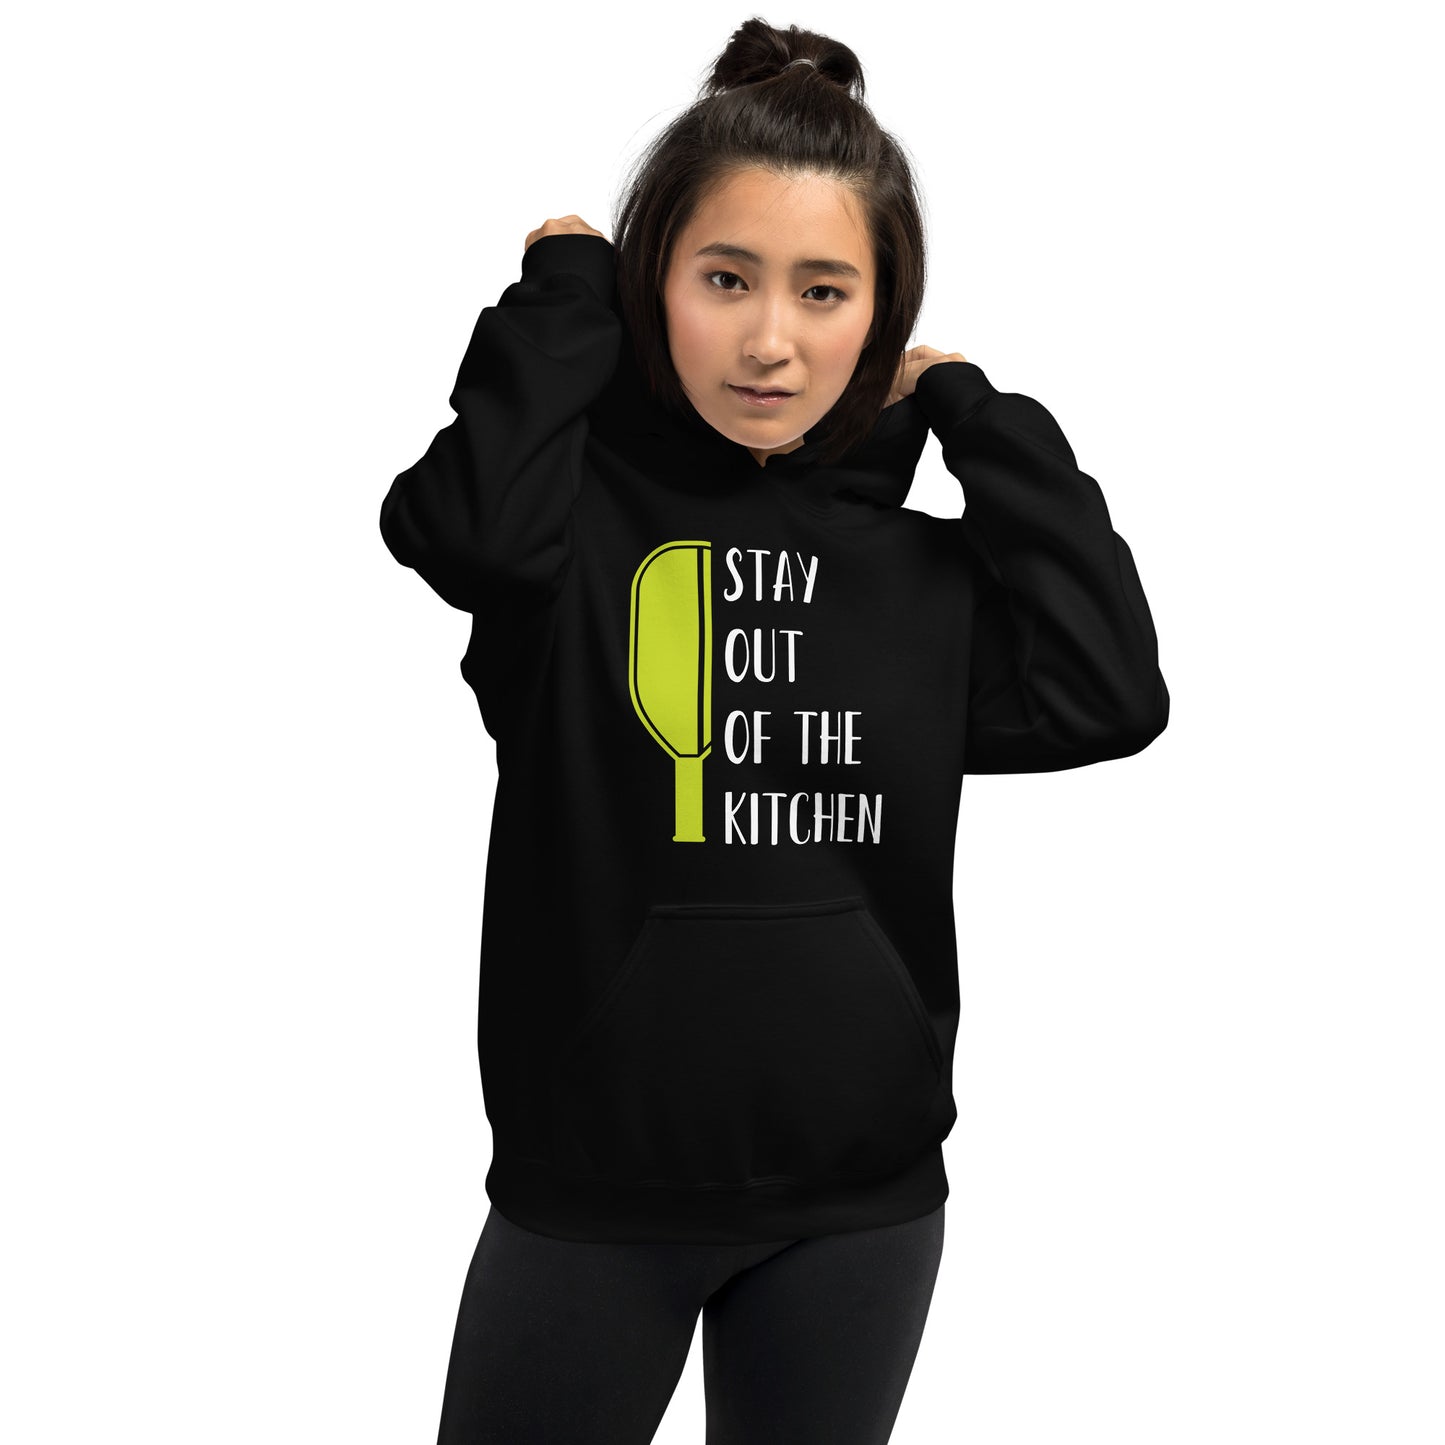 Stay out of the kitchen - Unisex Hoodie